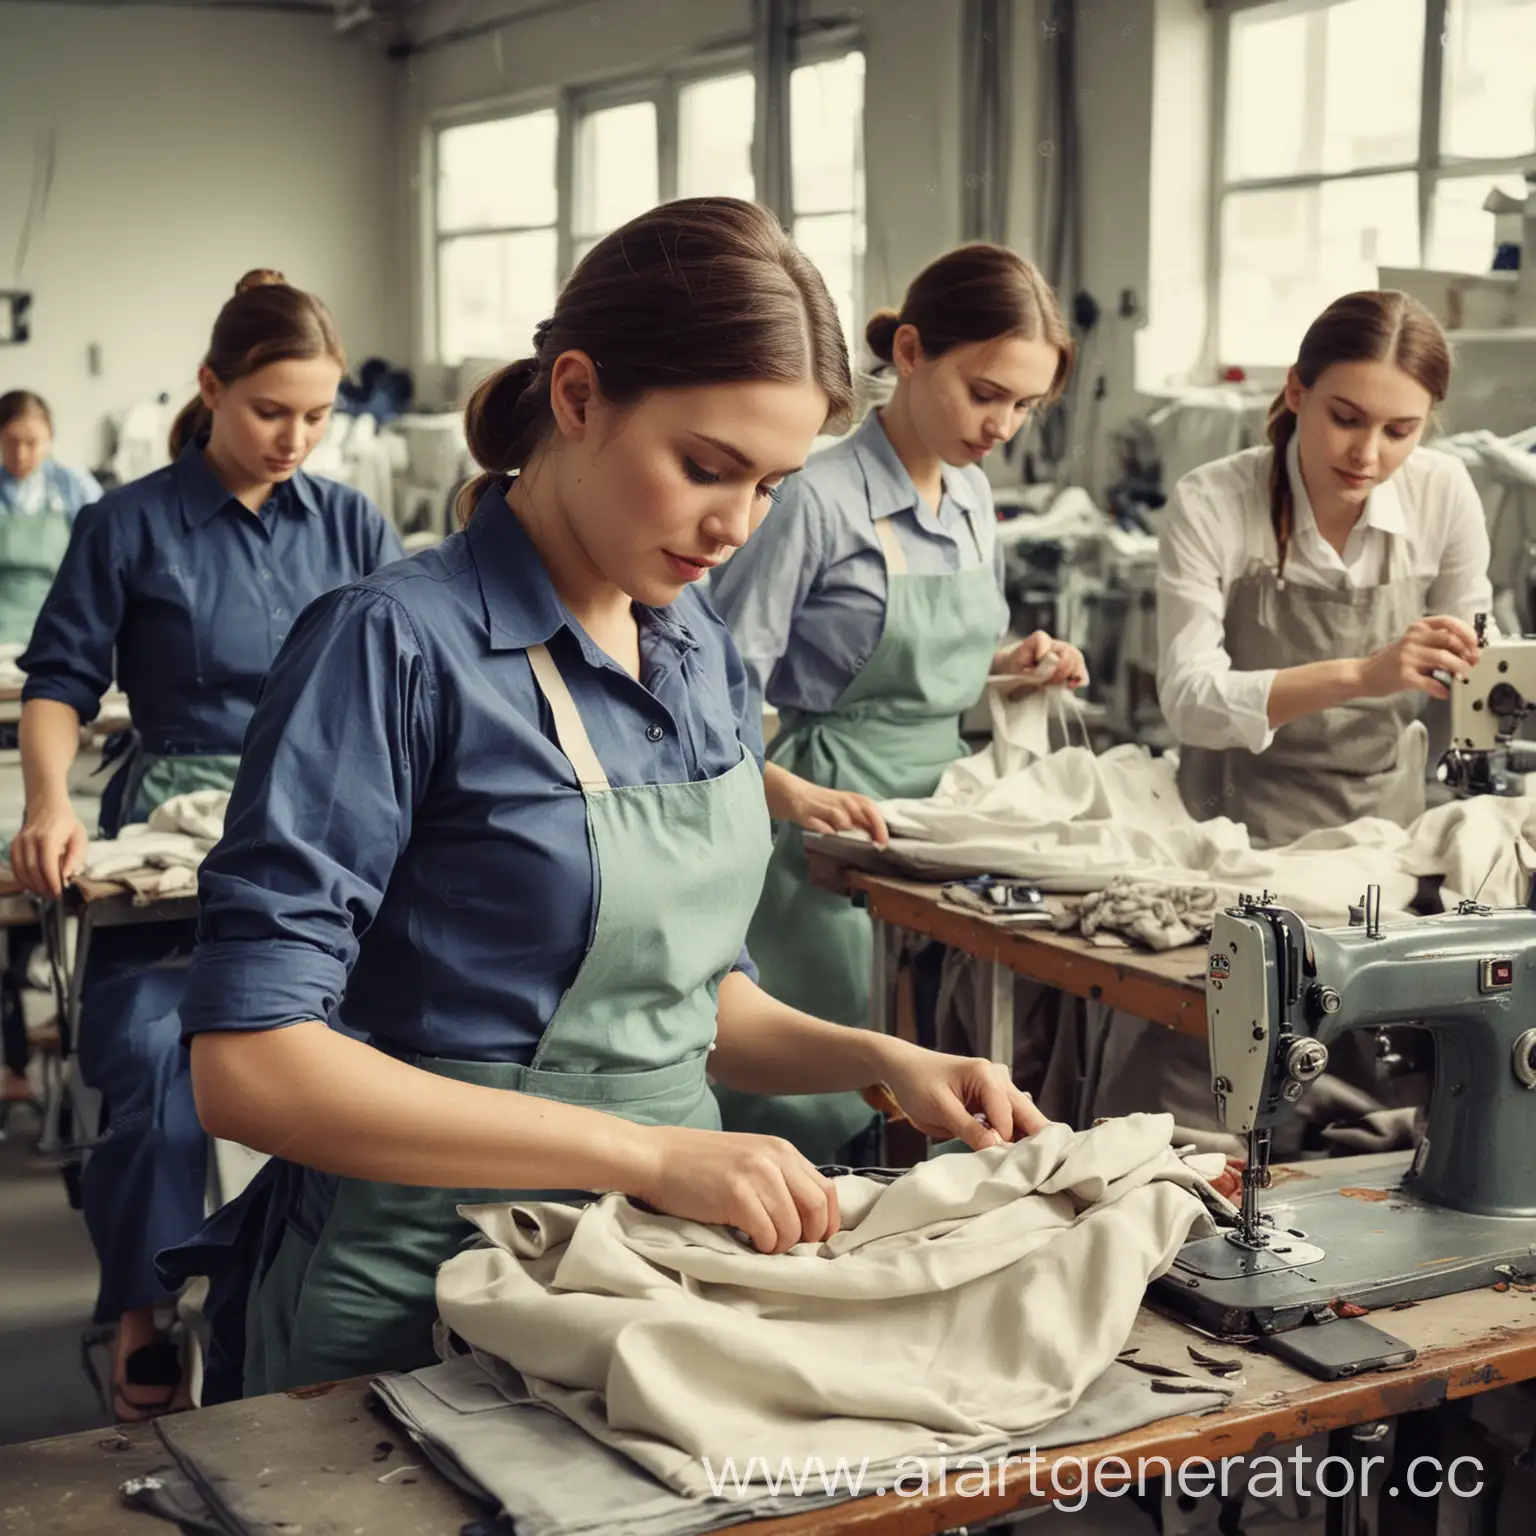 seamstresses, clothing factory, tailoring work